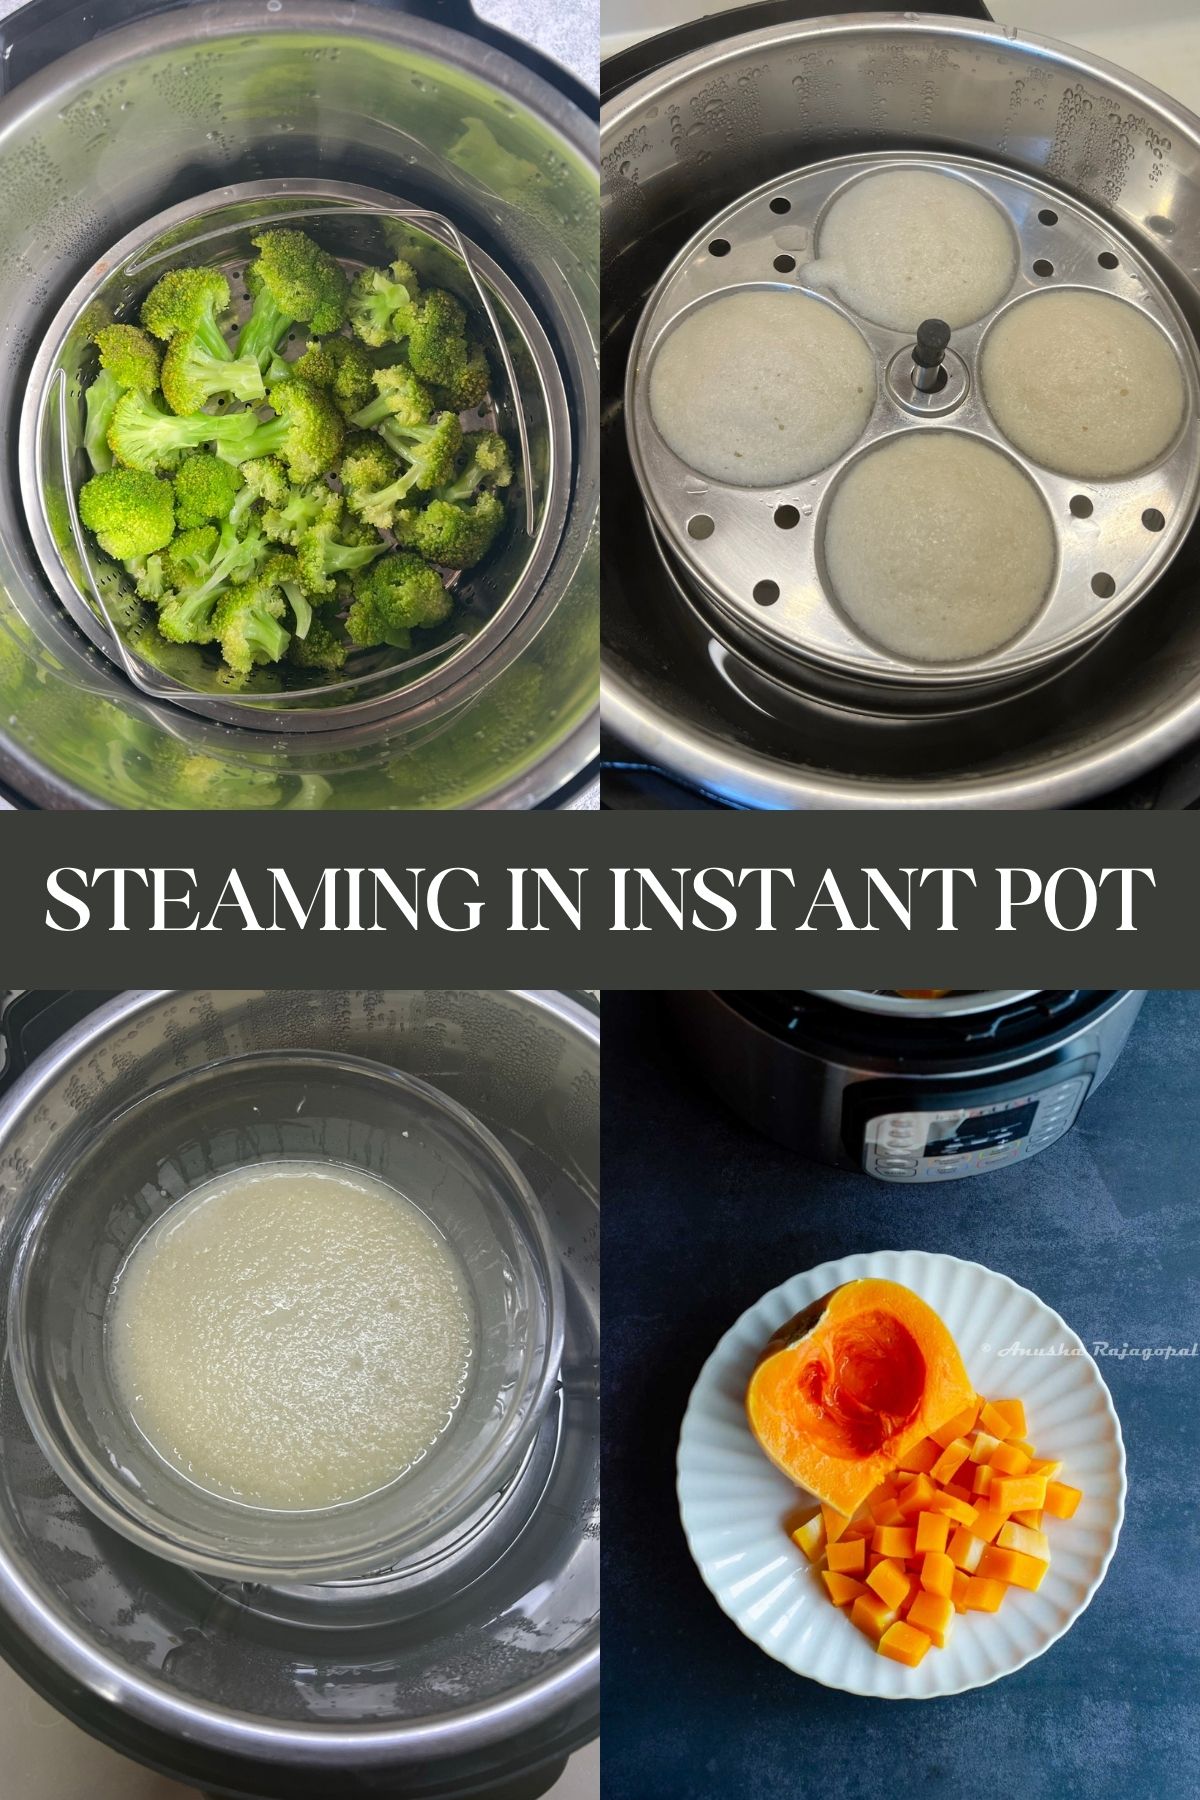 https://www.tomatoblues.com/wp-content/uploads/2022/11/Guide-to-steaming-in-Instant-Pot.jpg